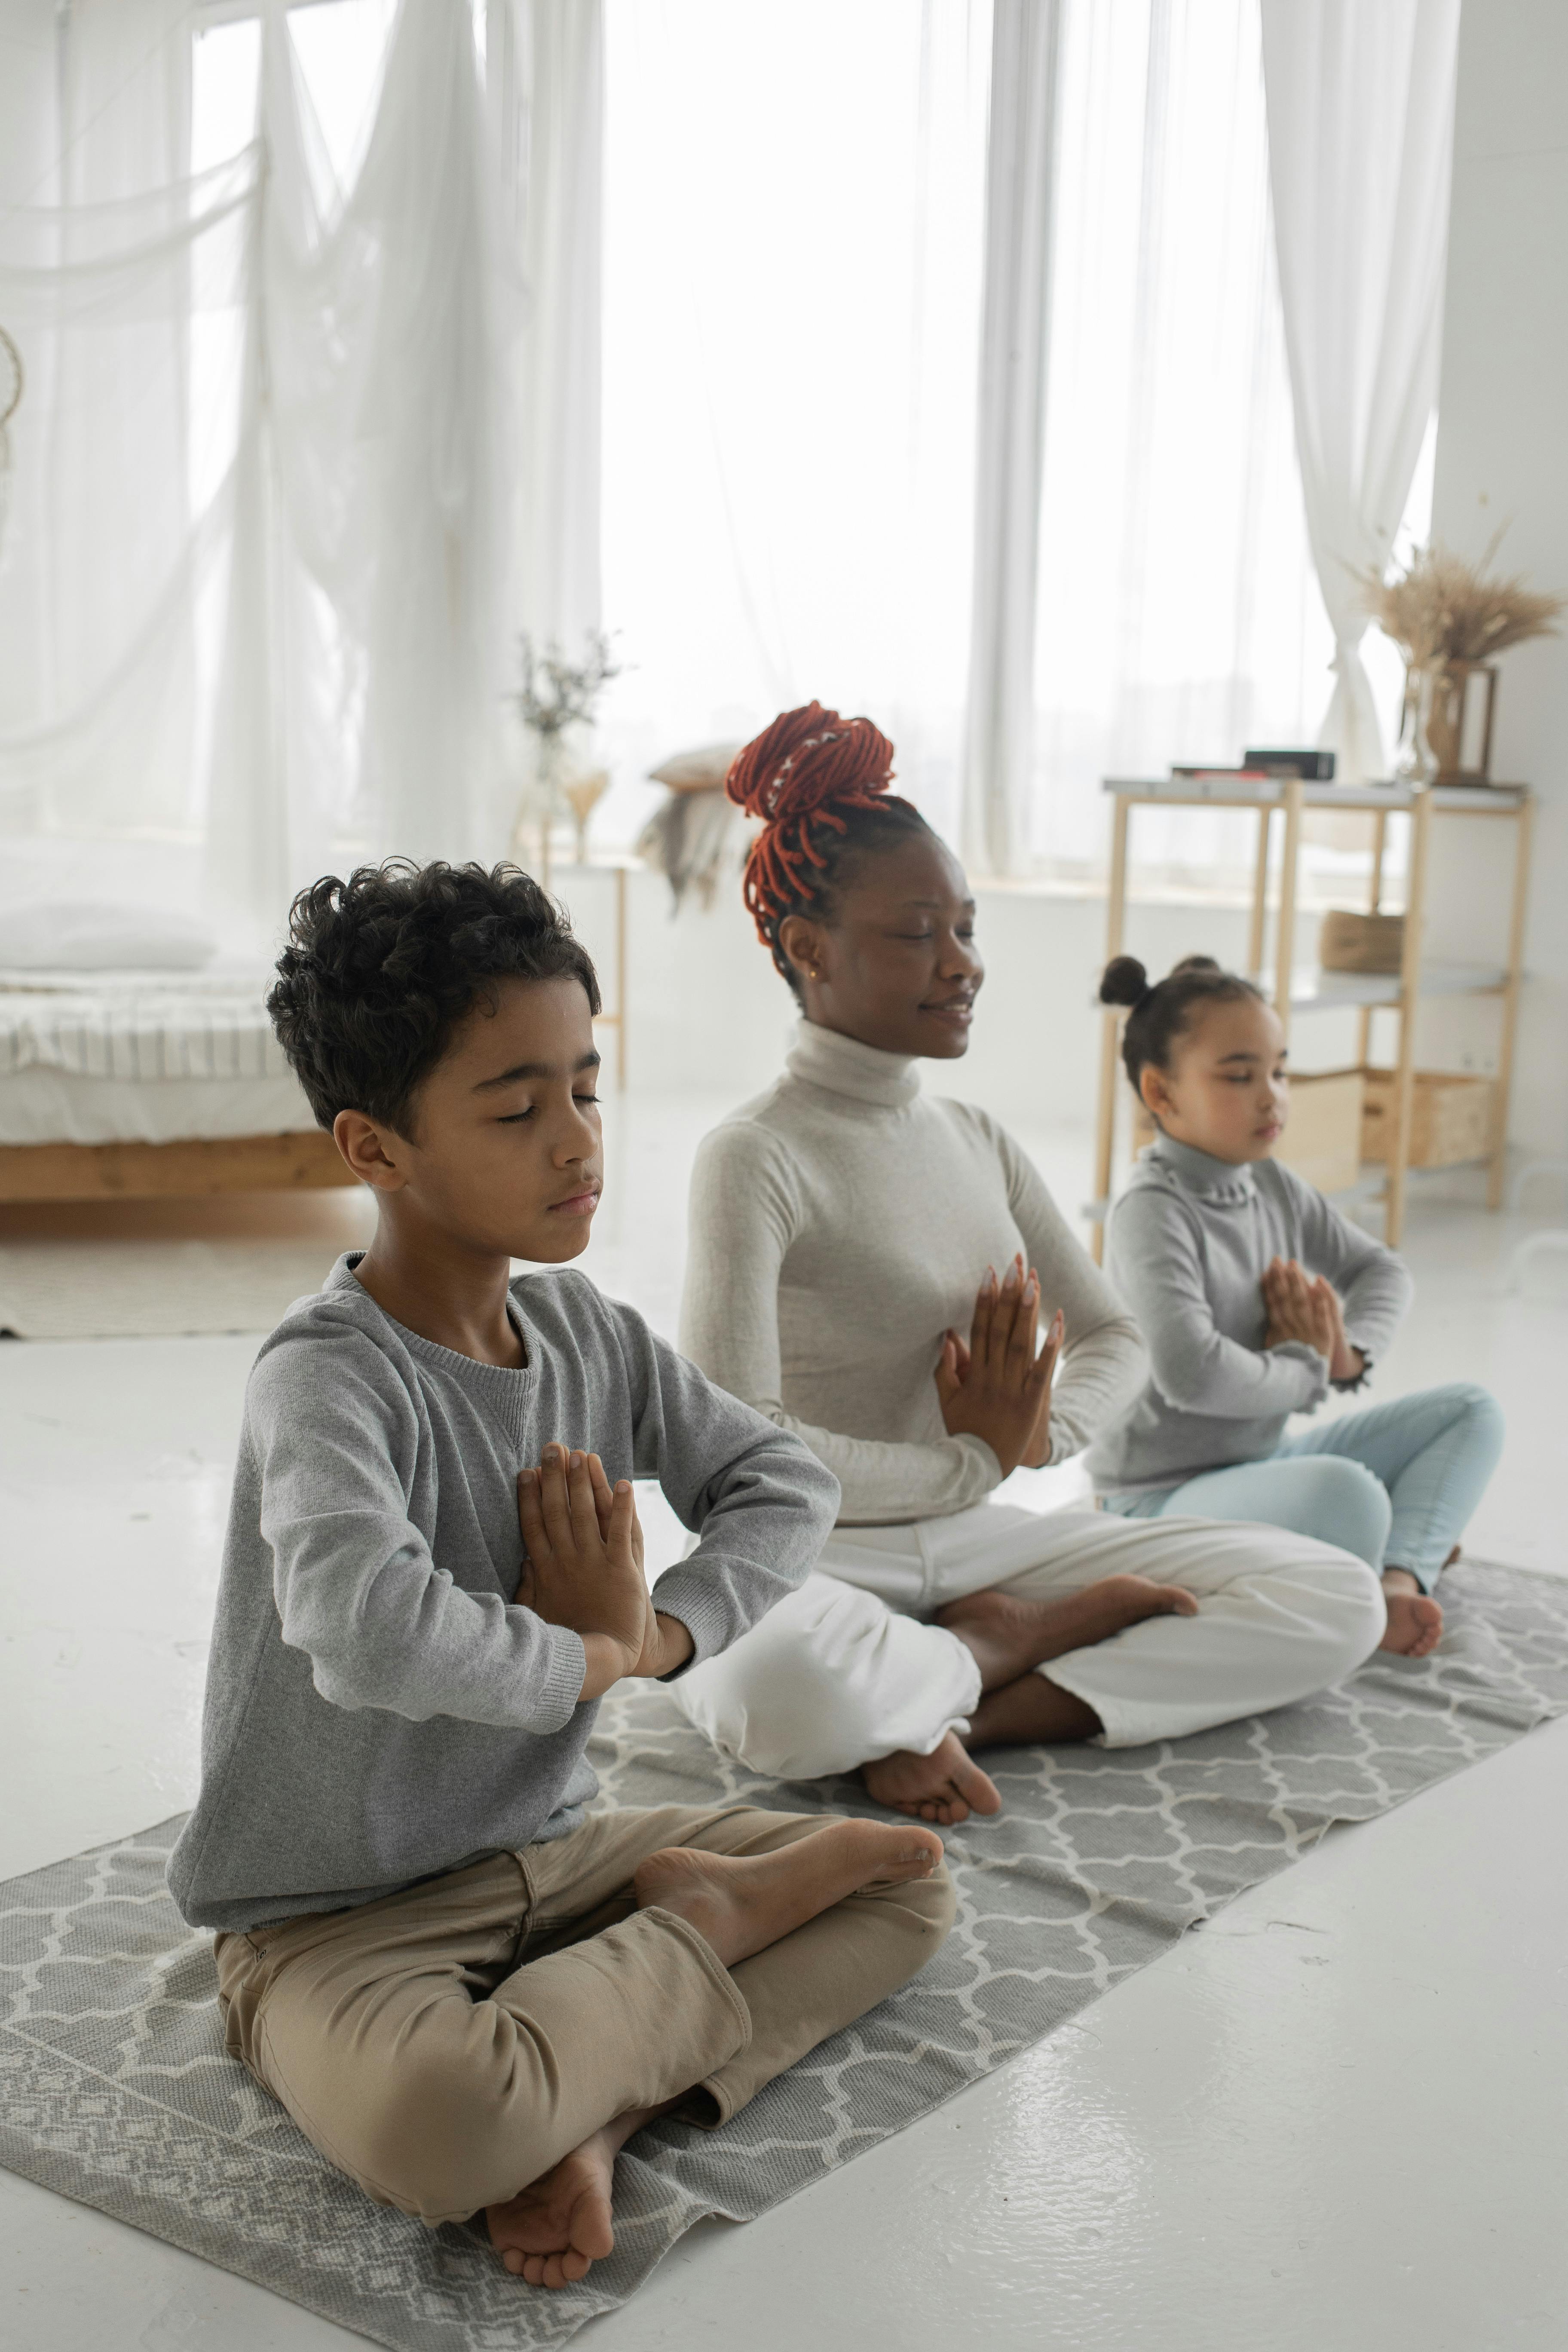 Yoga at Home for Kids